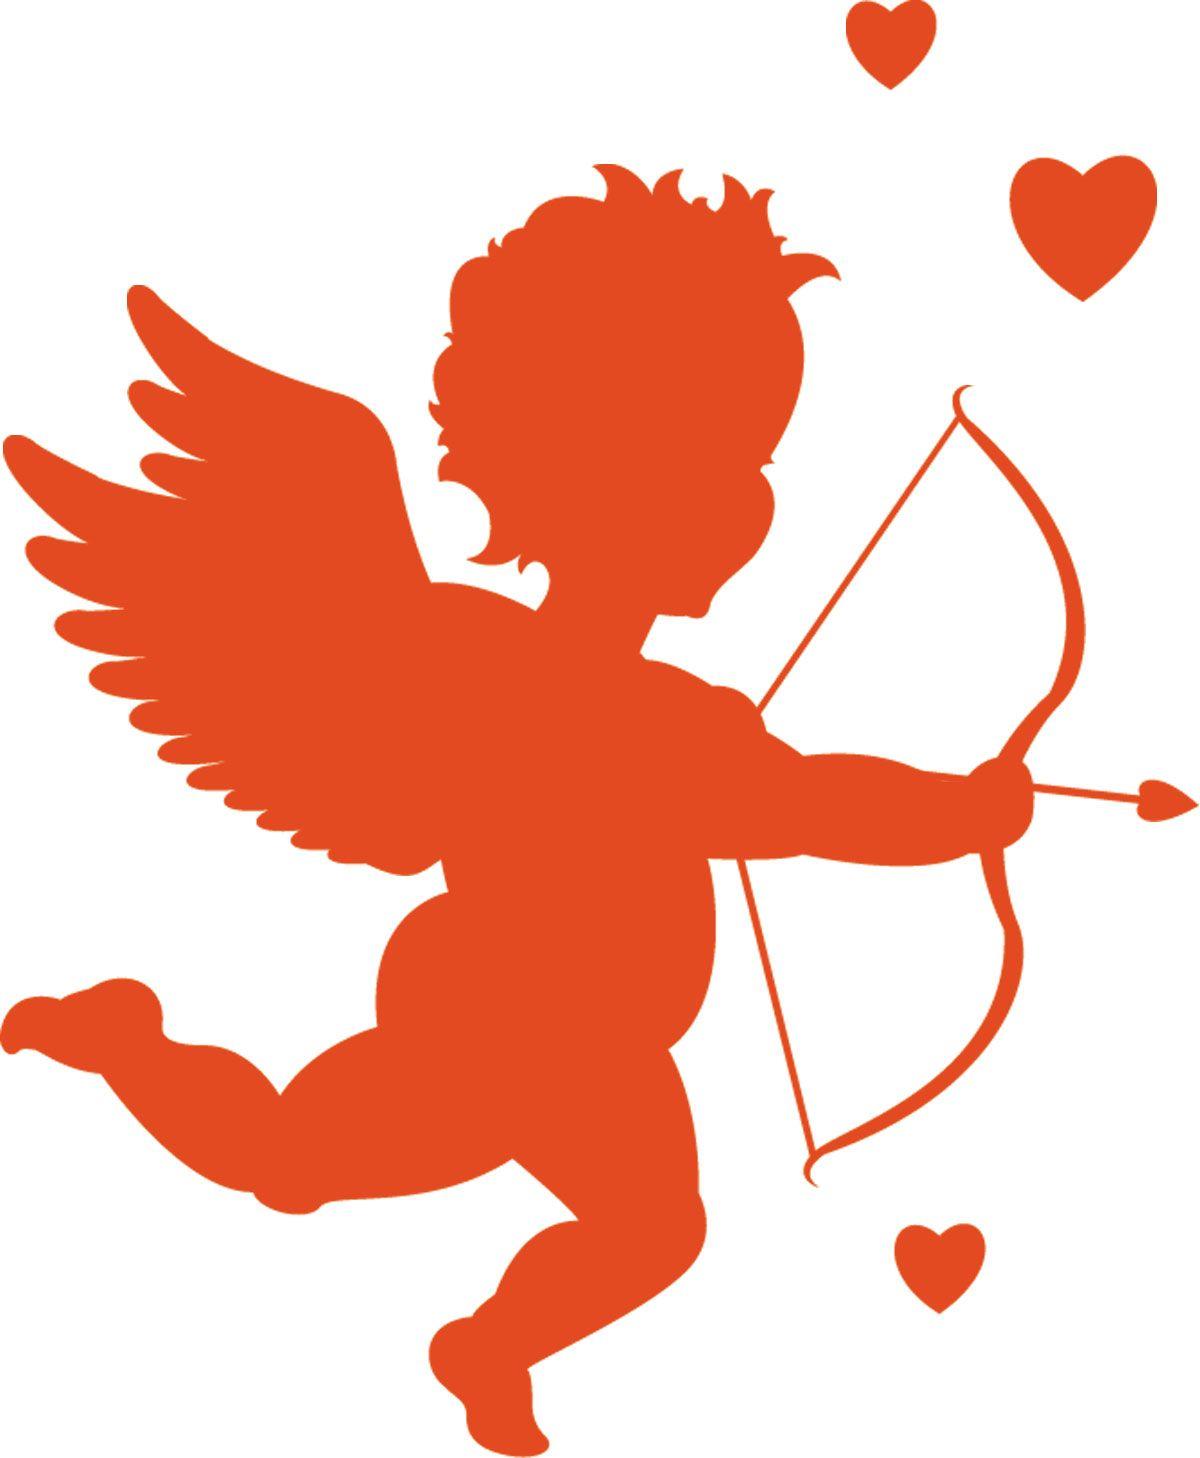 Cupid Wallpaper, HD Quality Picture